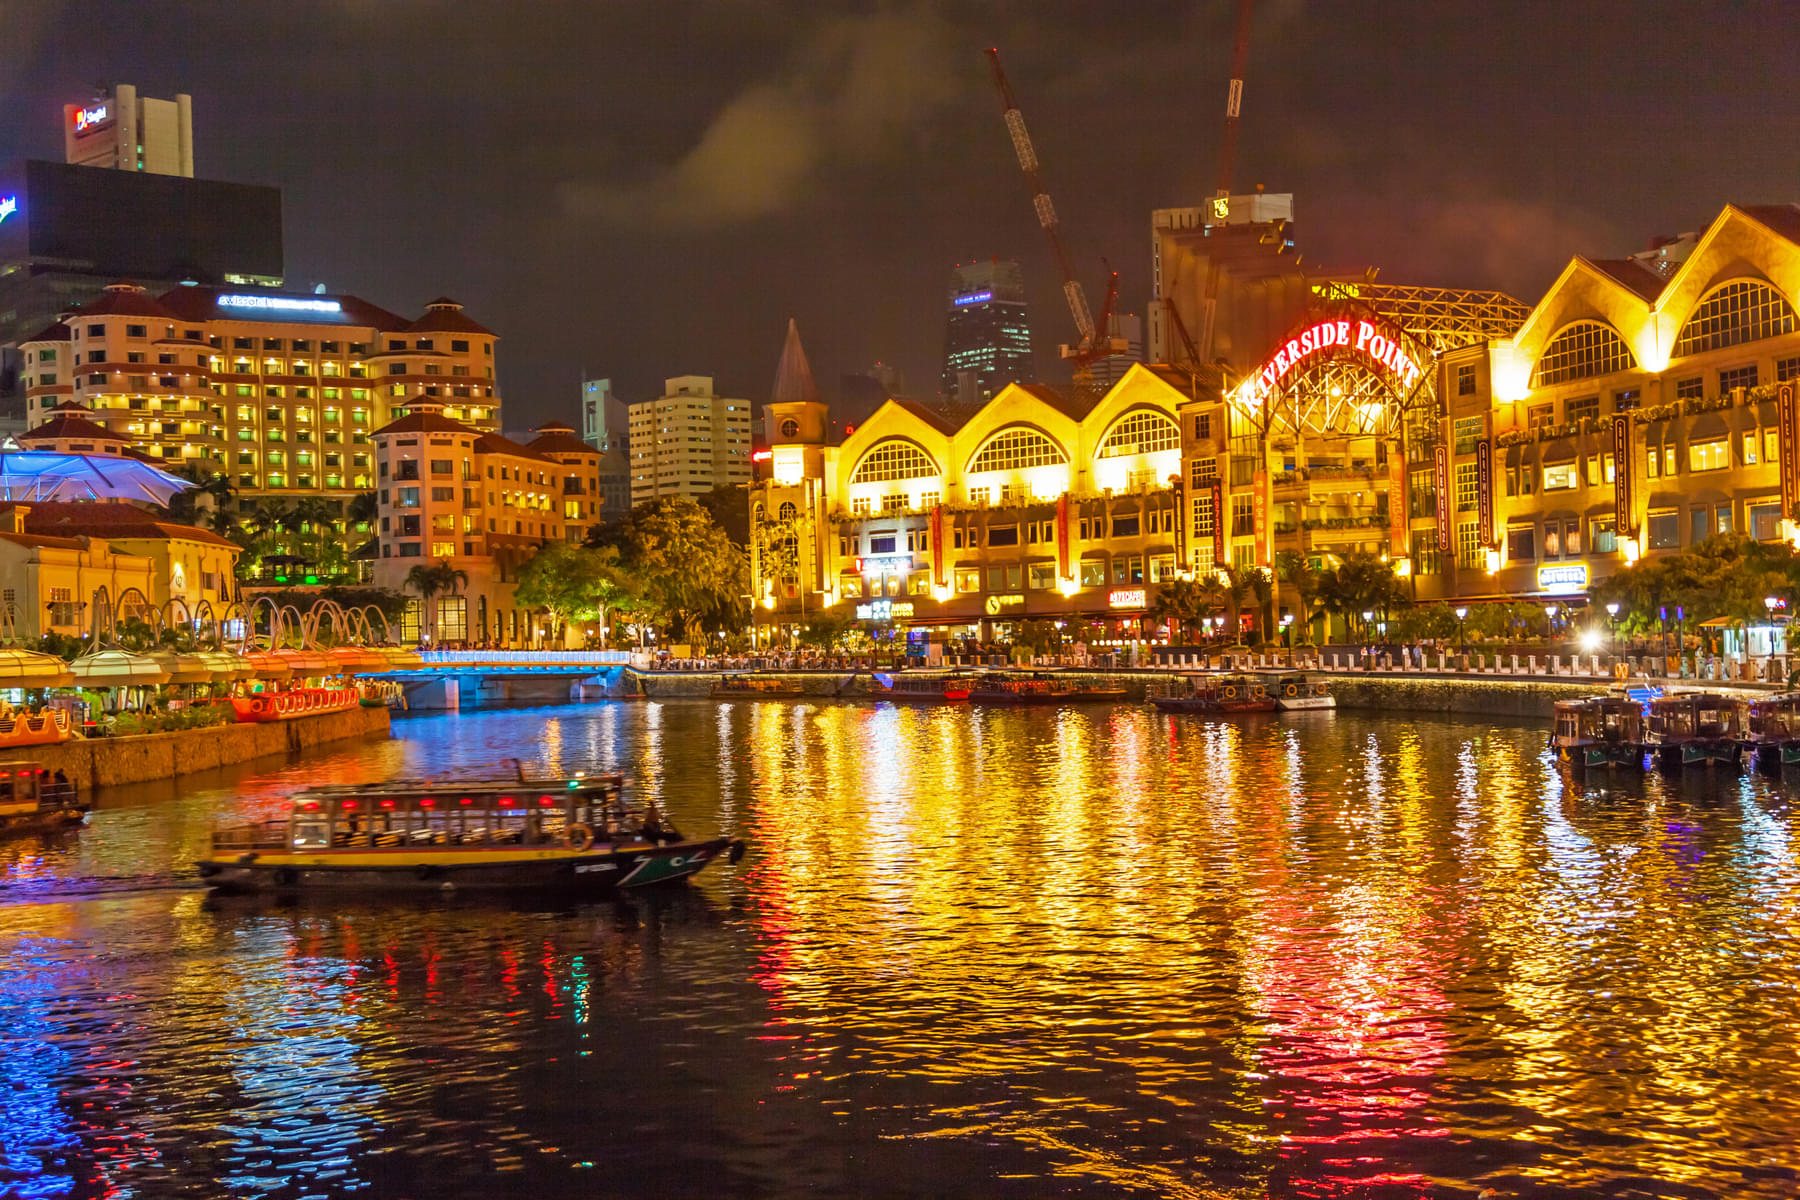 Singapore River Cruise with Seafood Restaurant Dinner and Chinatown Murals Tour